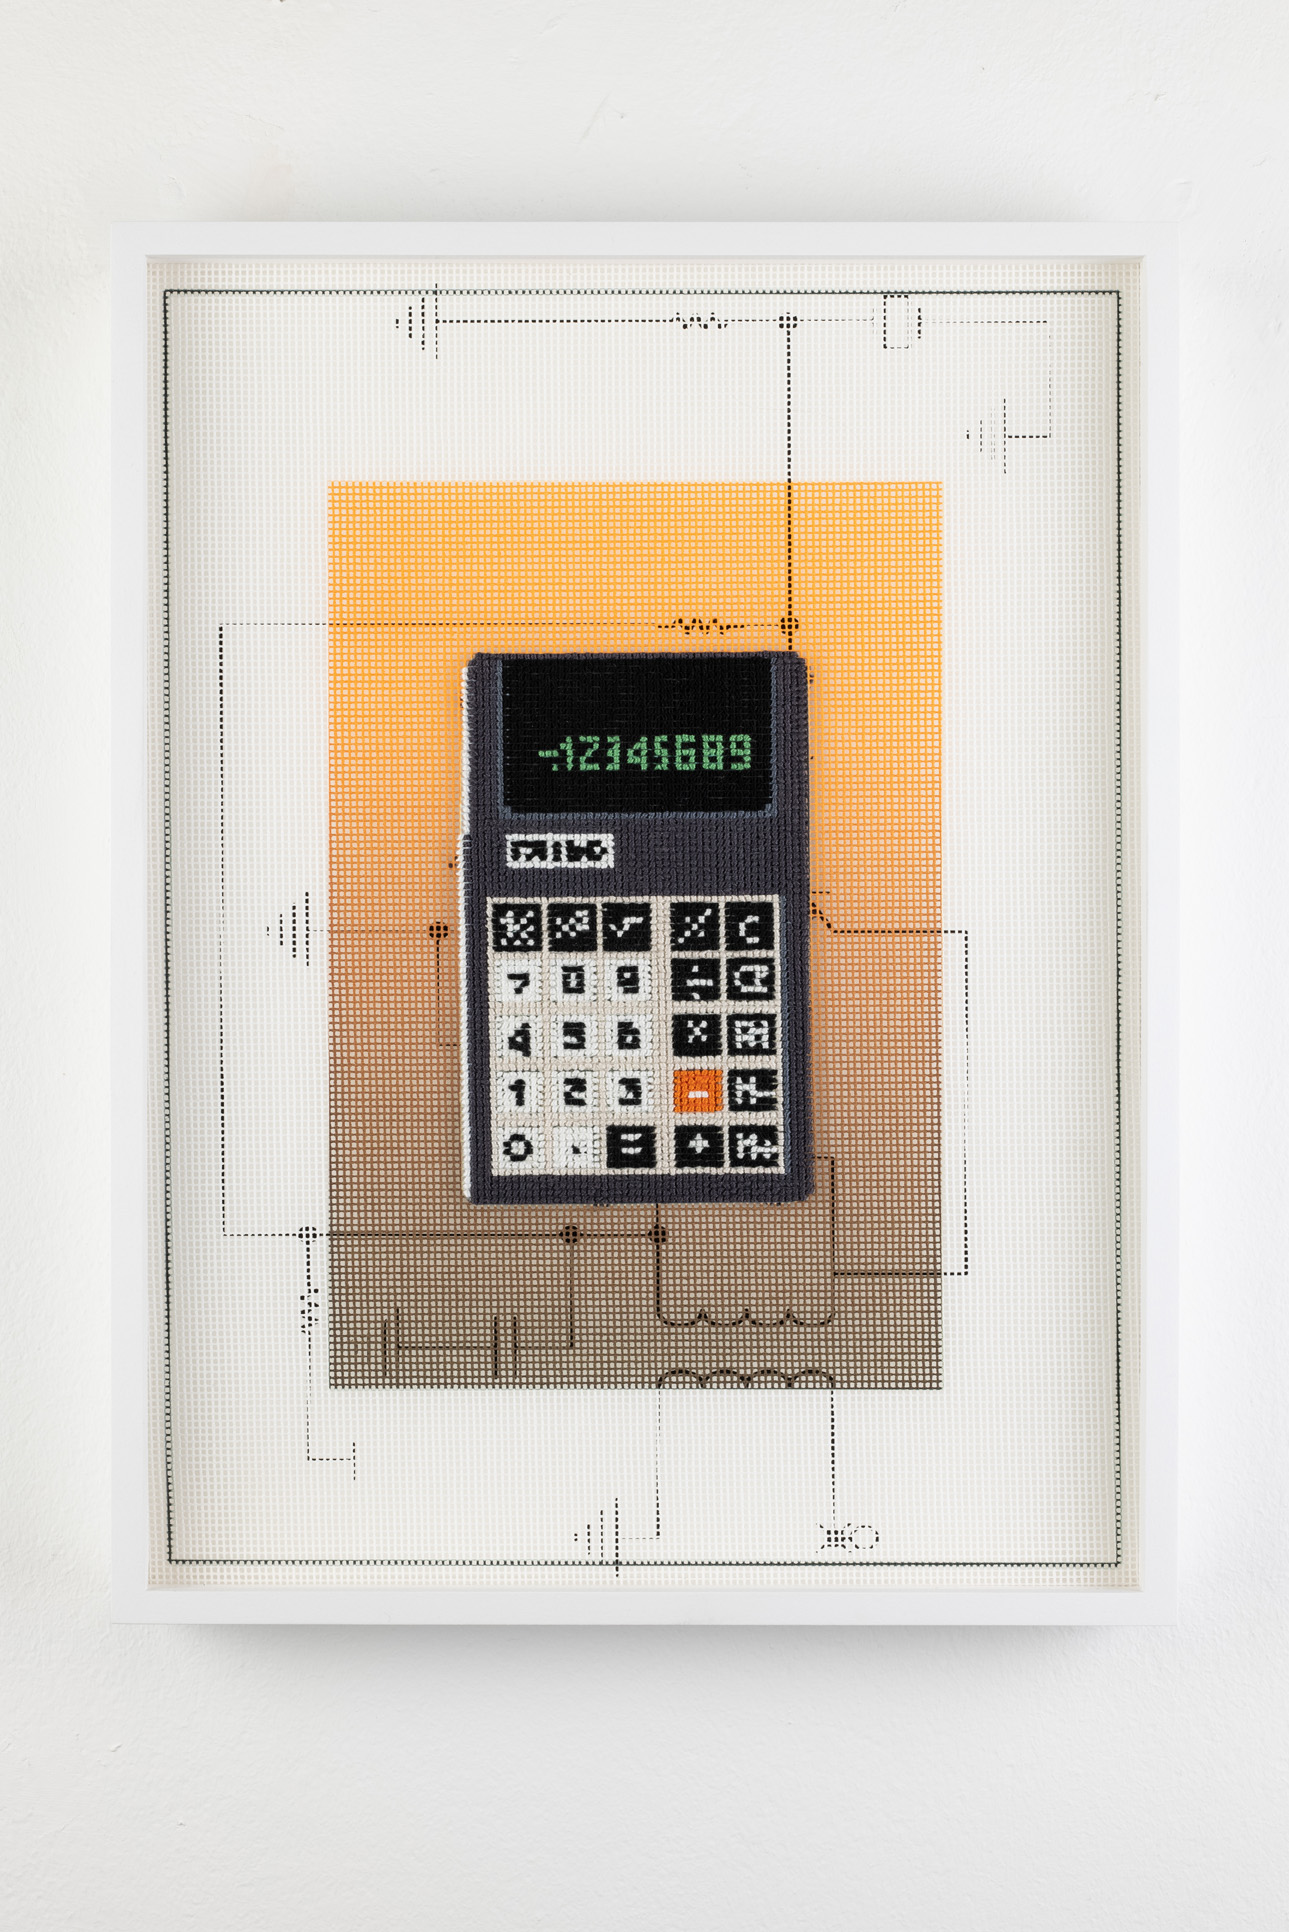 Early Digital Tech, Artifacts from The Age of Acceleration (EliteS2003 Pocket Calculator (1976)), 2021